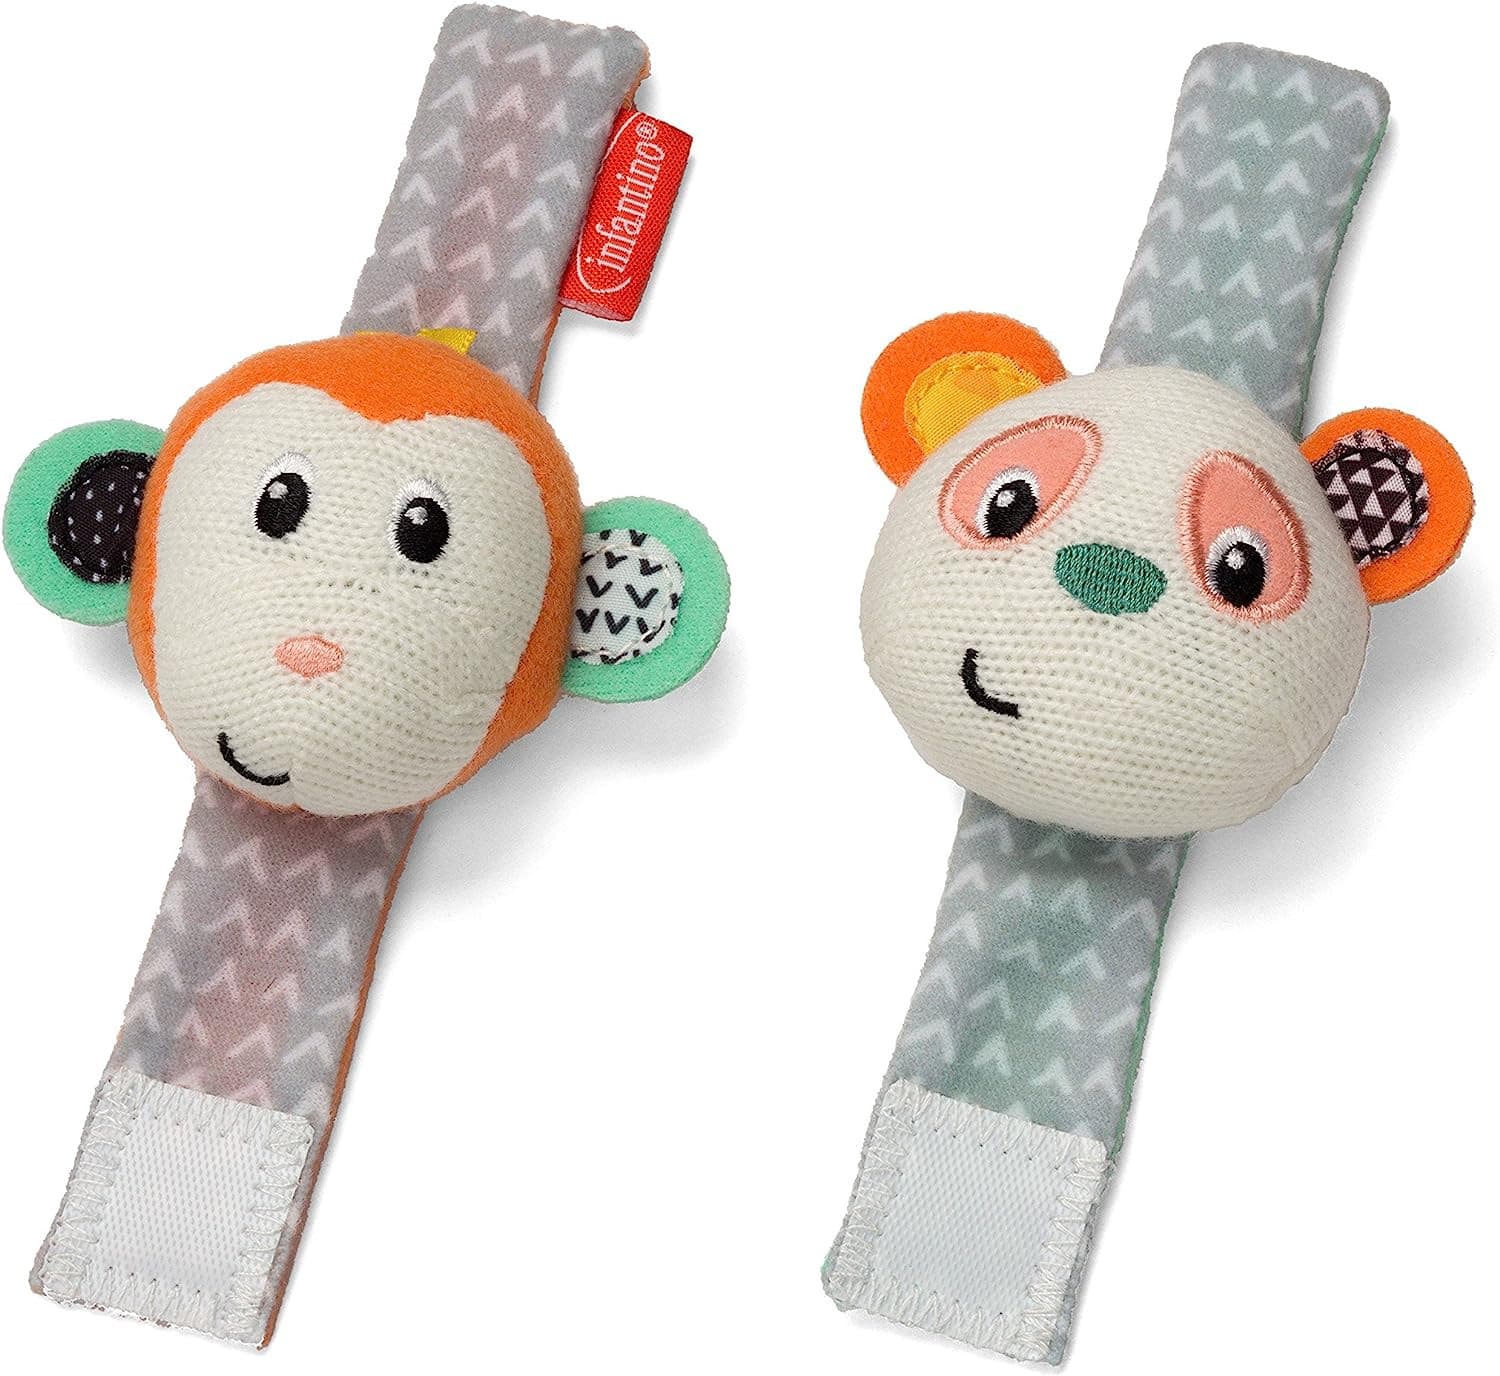 Infantino Baby Wrist Rattles, Monkey and Panda-Themed, 1-Piece Set for Babies 0M+.